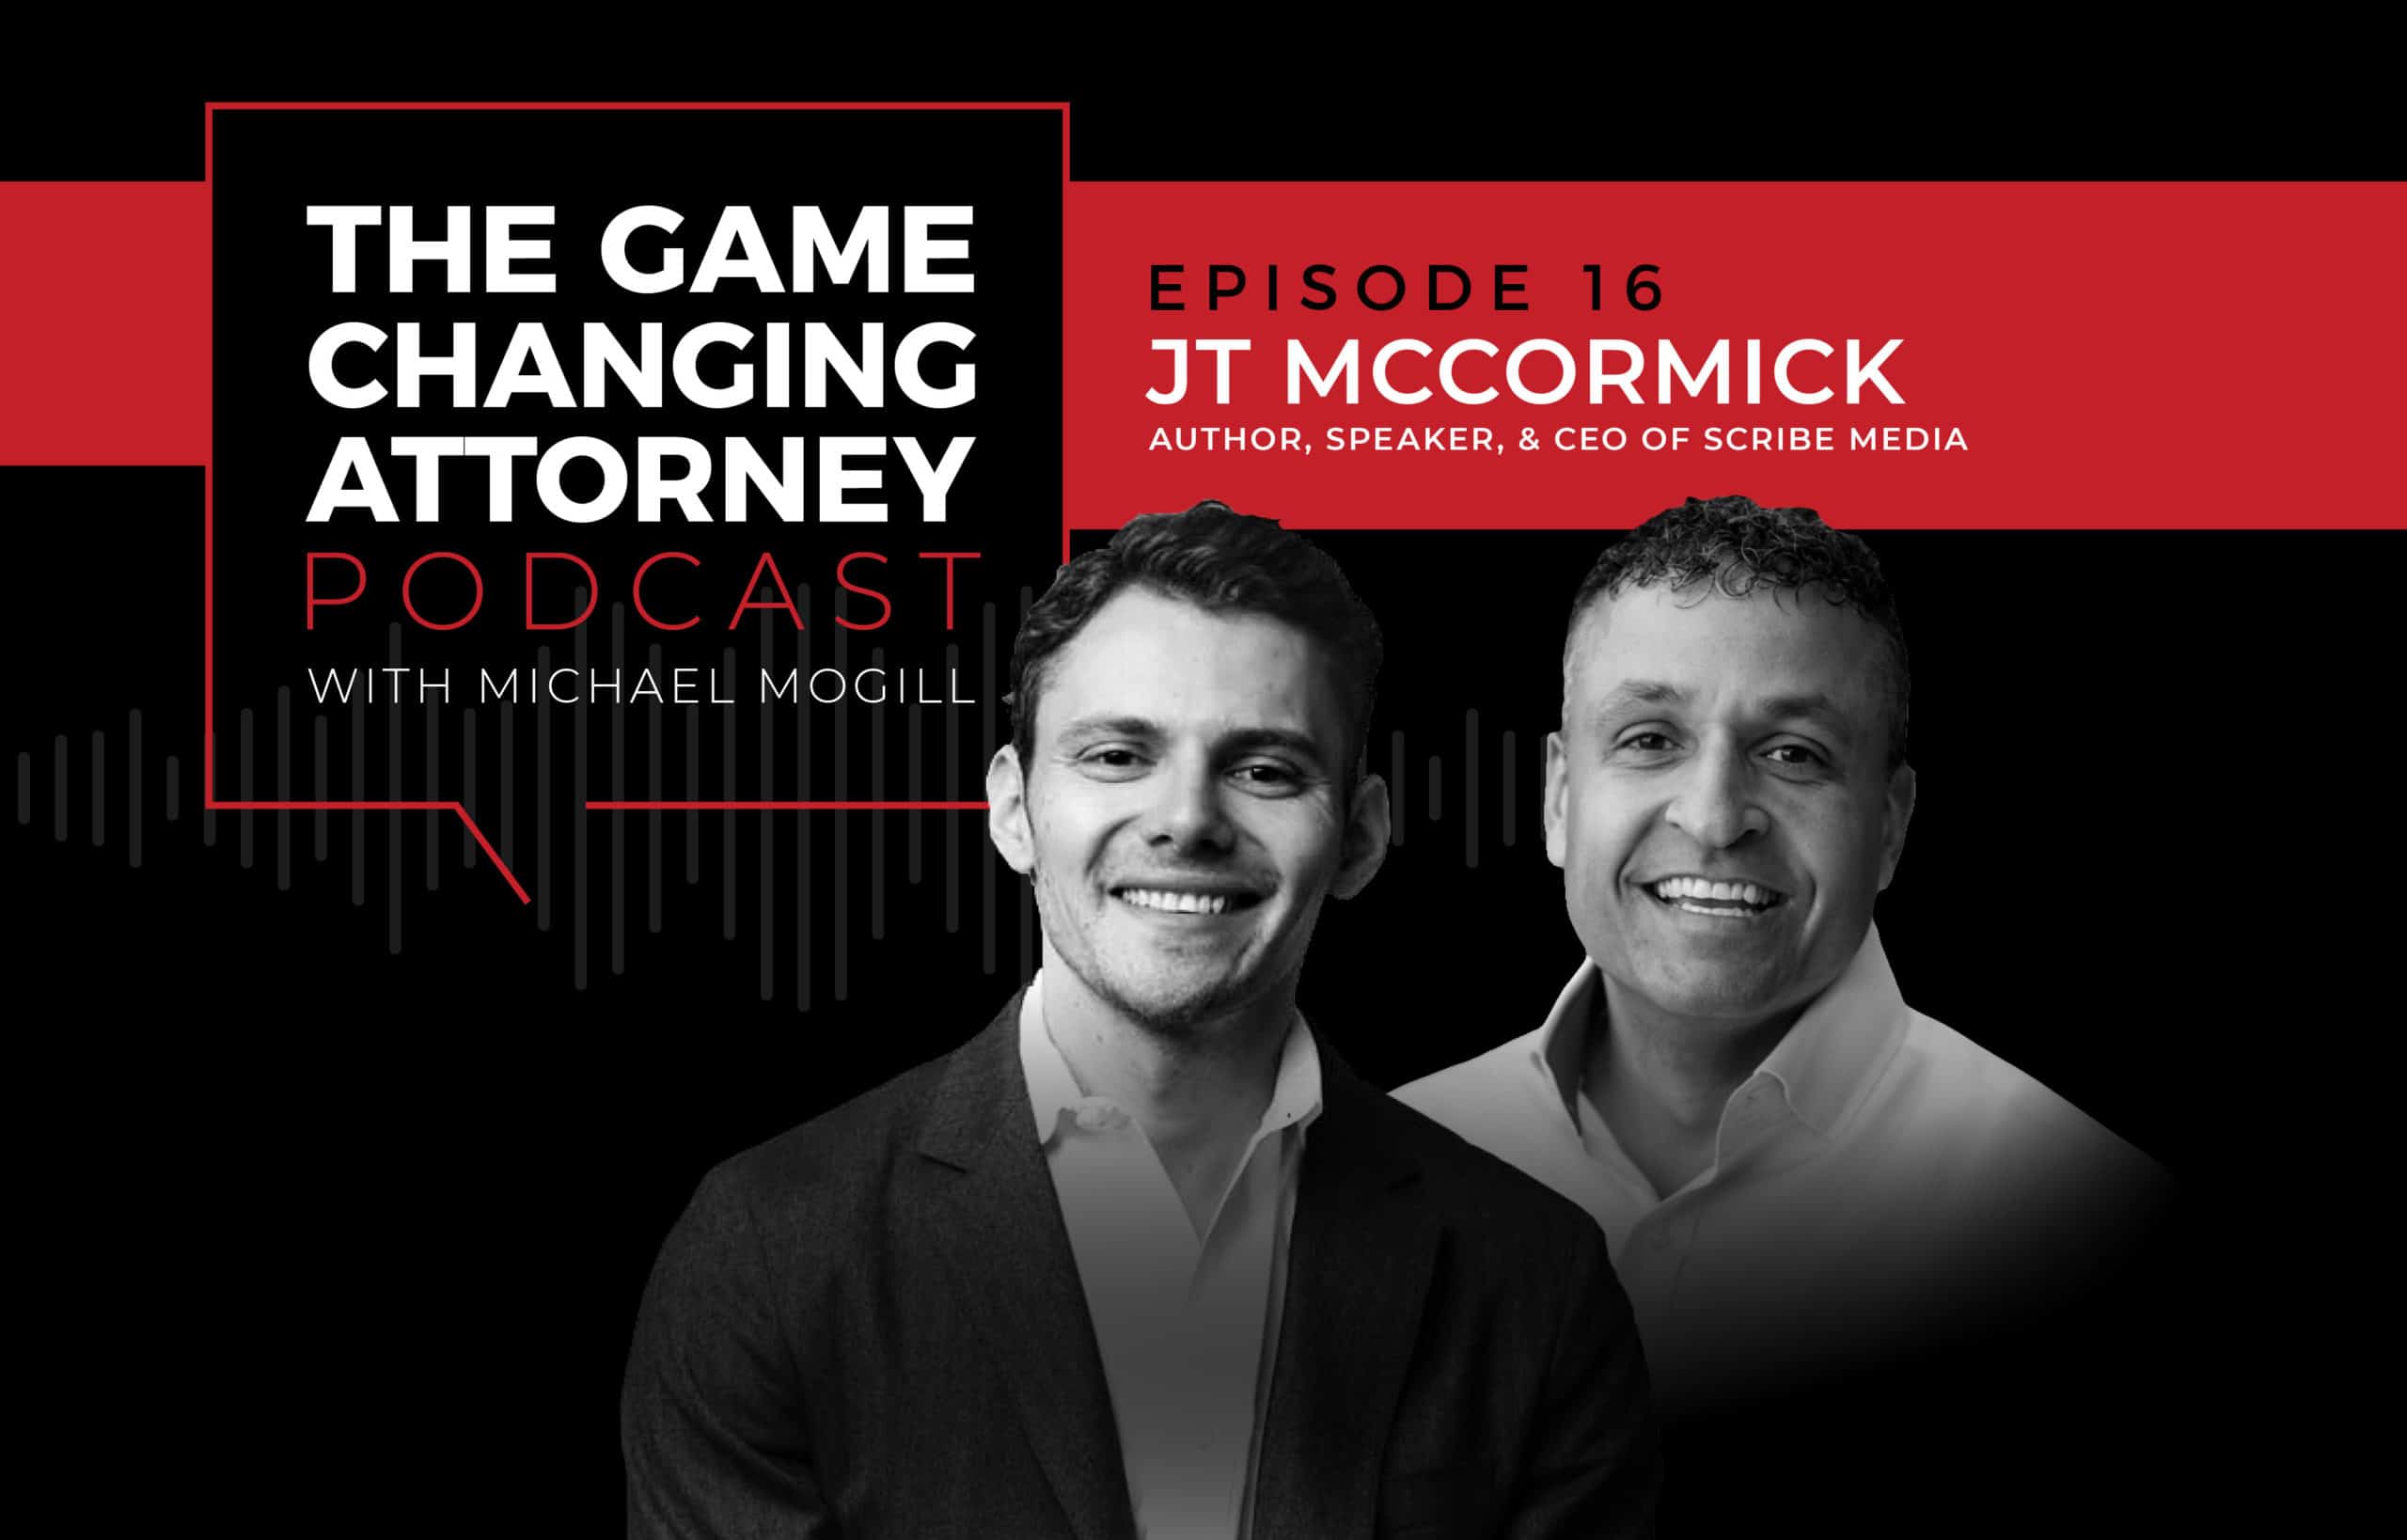 JT McCormick - The Game Changing Attorney Podcast - Mobile